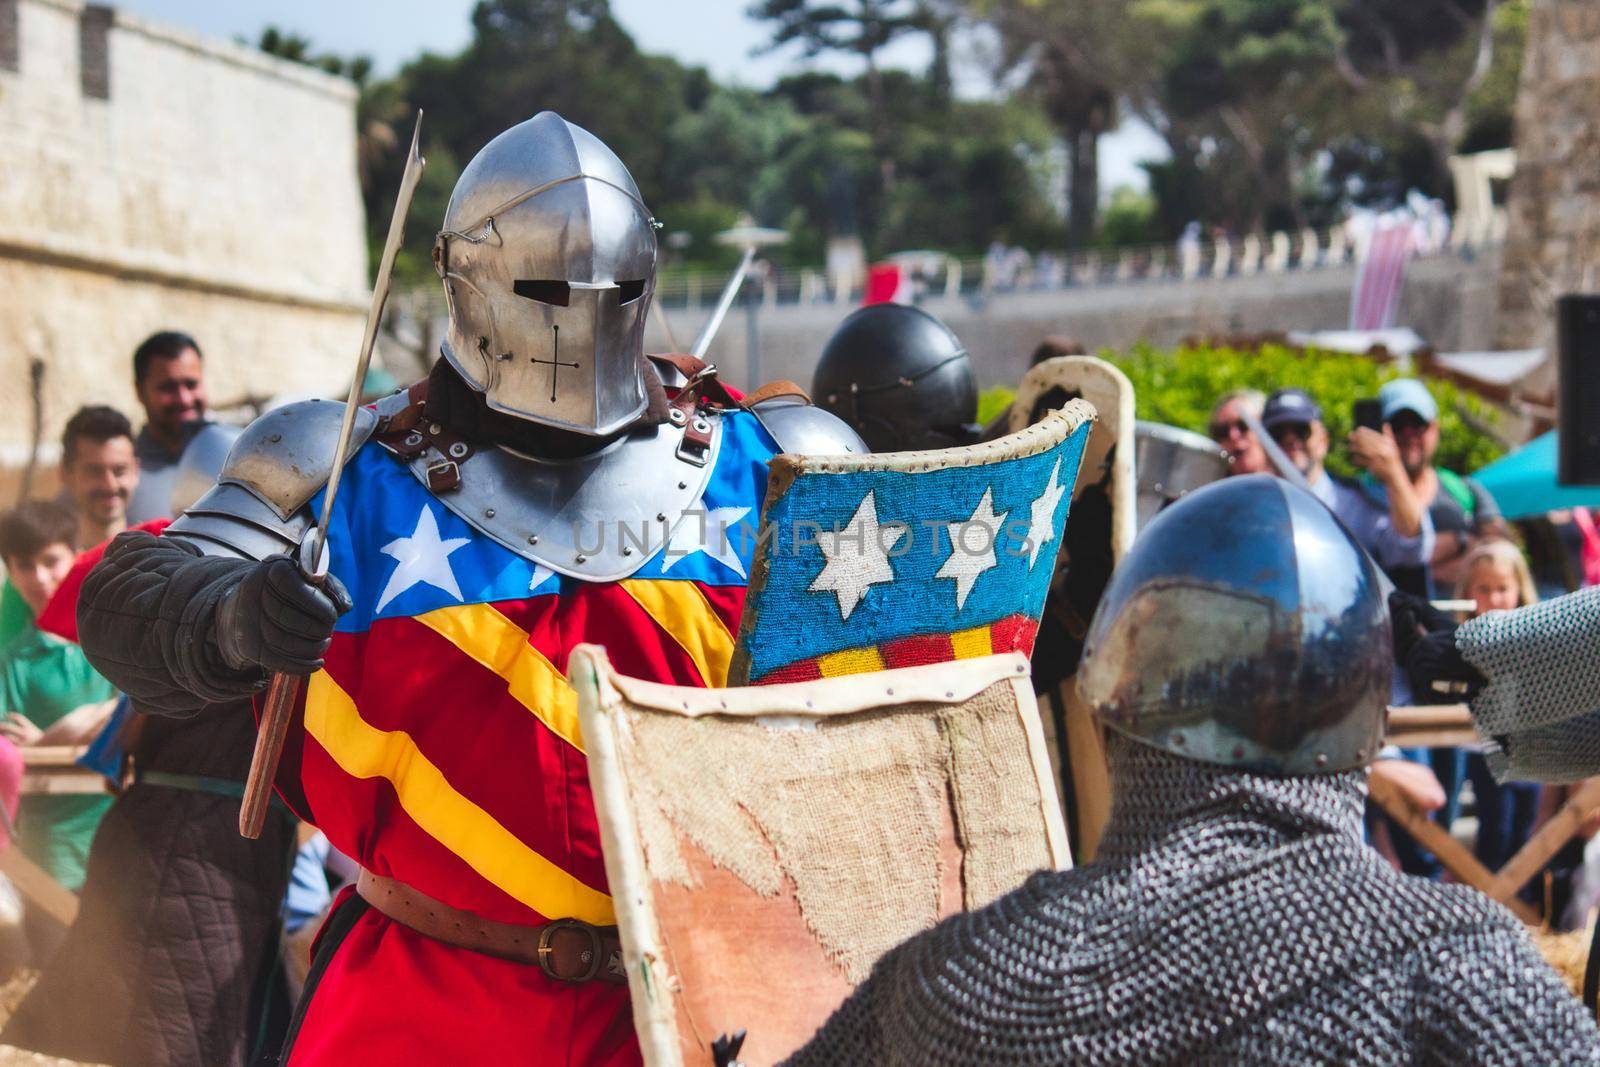 Mdina / Malta - May 4 2019: Men dressed as knights in armor reenacting a battle at a medieval festival by tennesseewitney